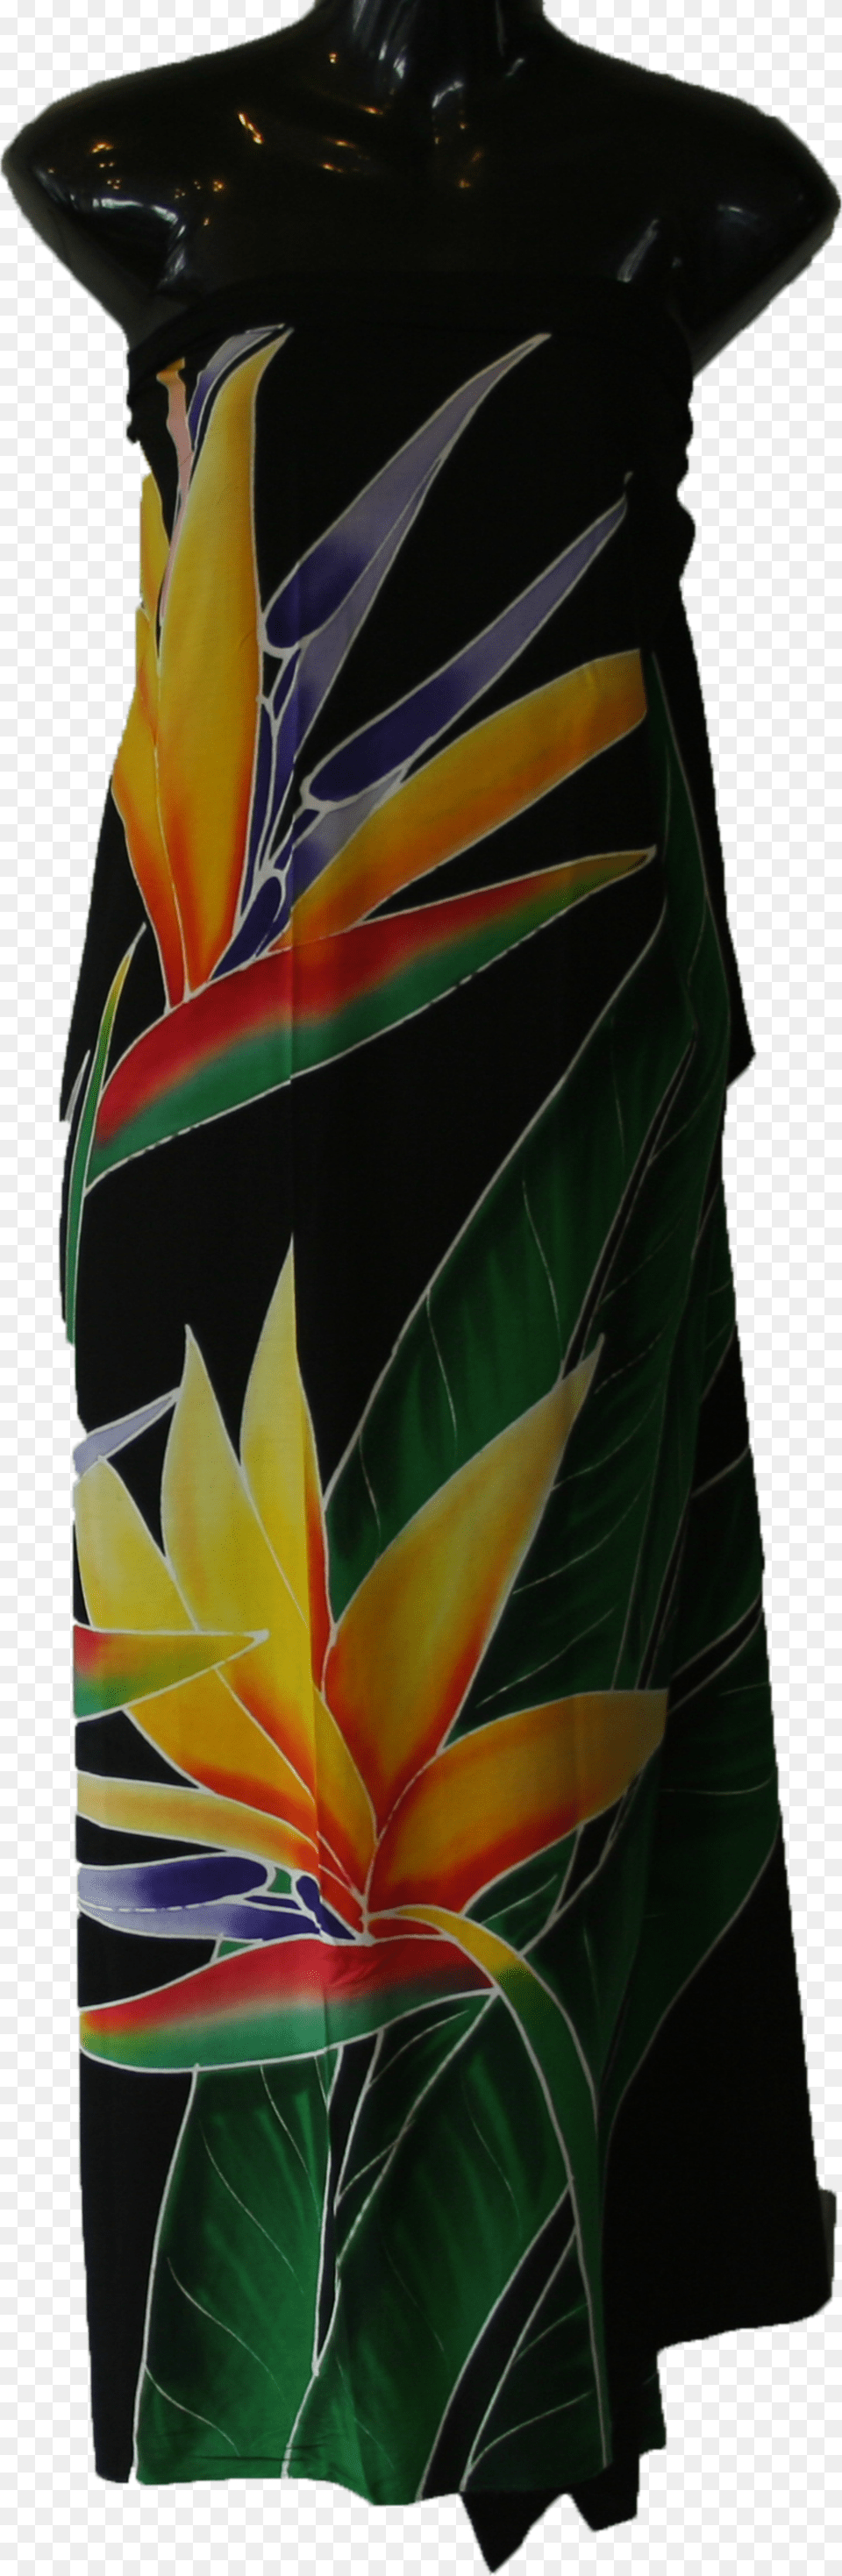 Bird Of Paradise Heliconia, Clothing, Dress, Formal Wear, Fashion Png Image